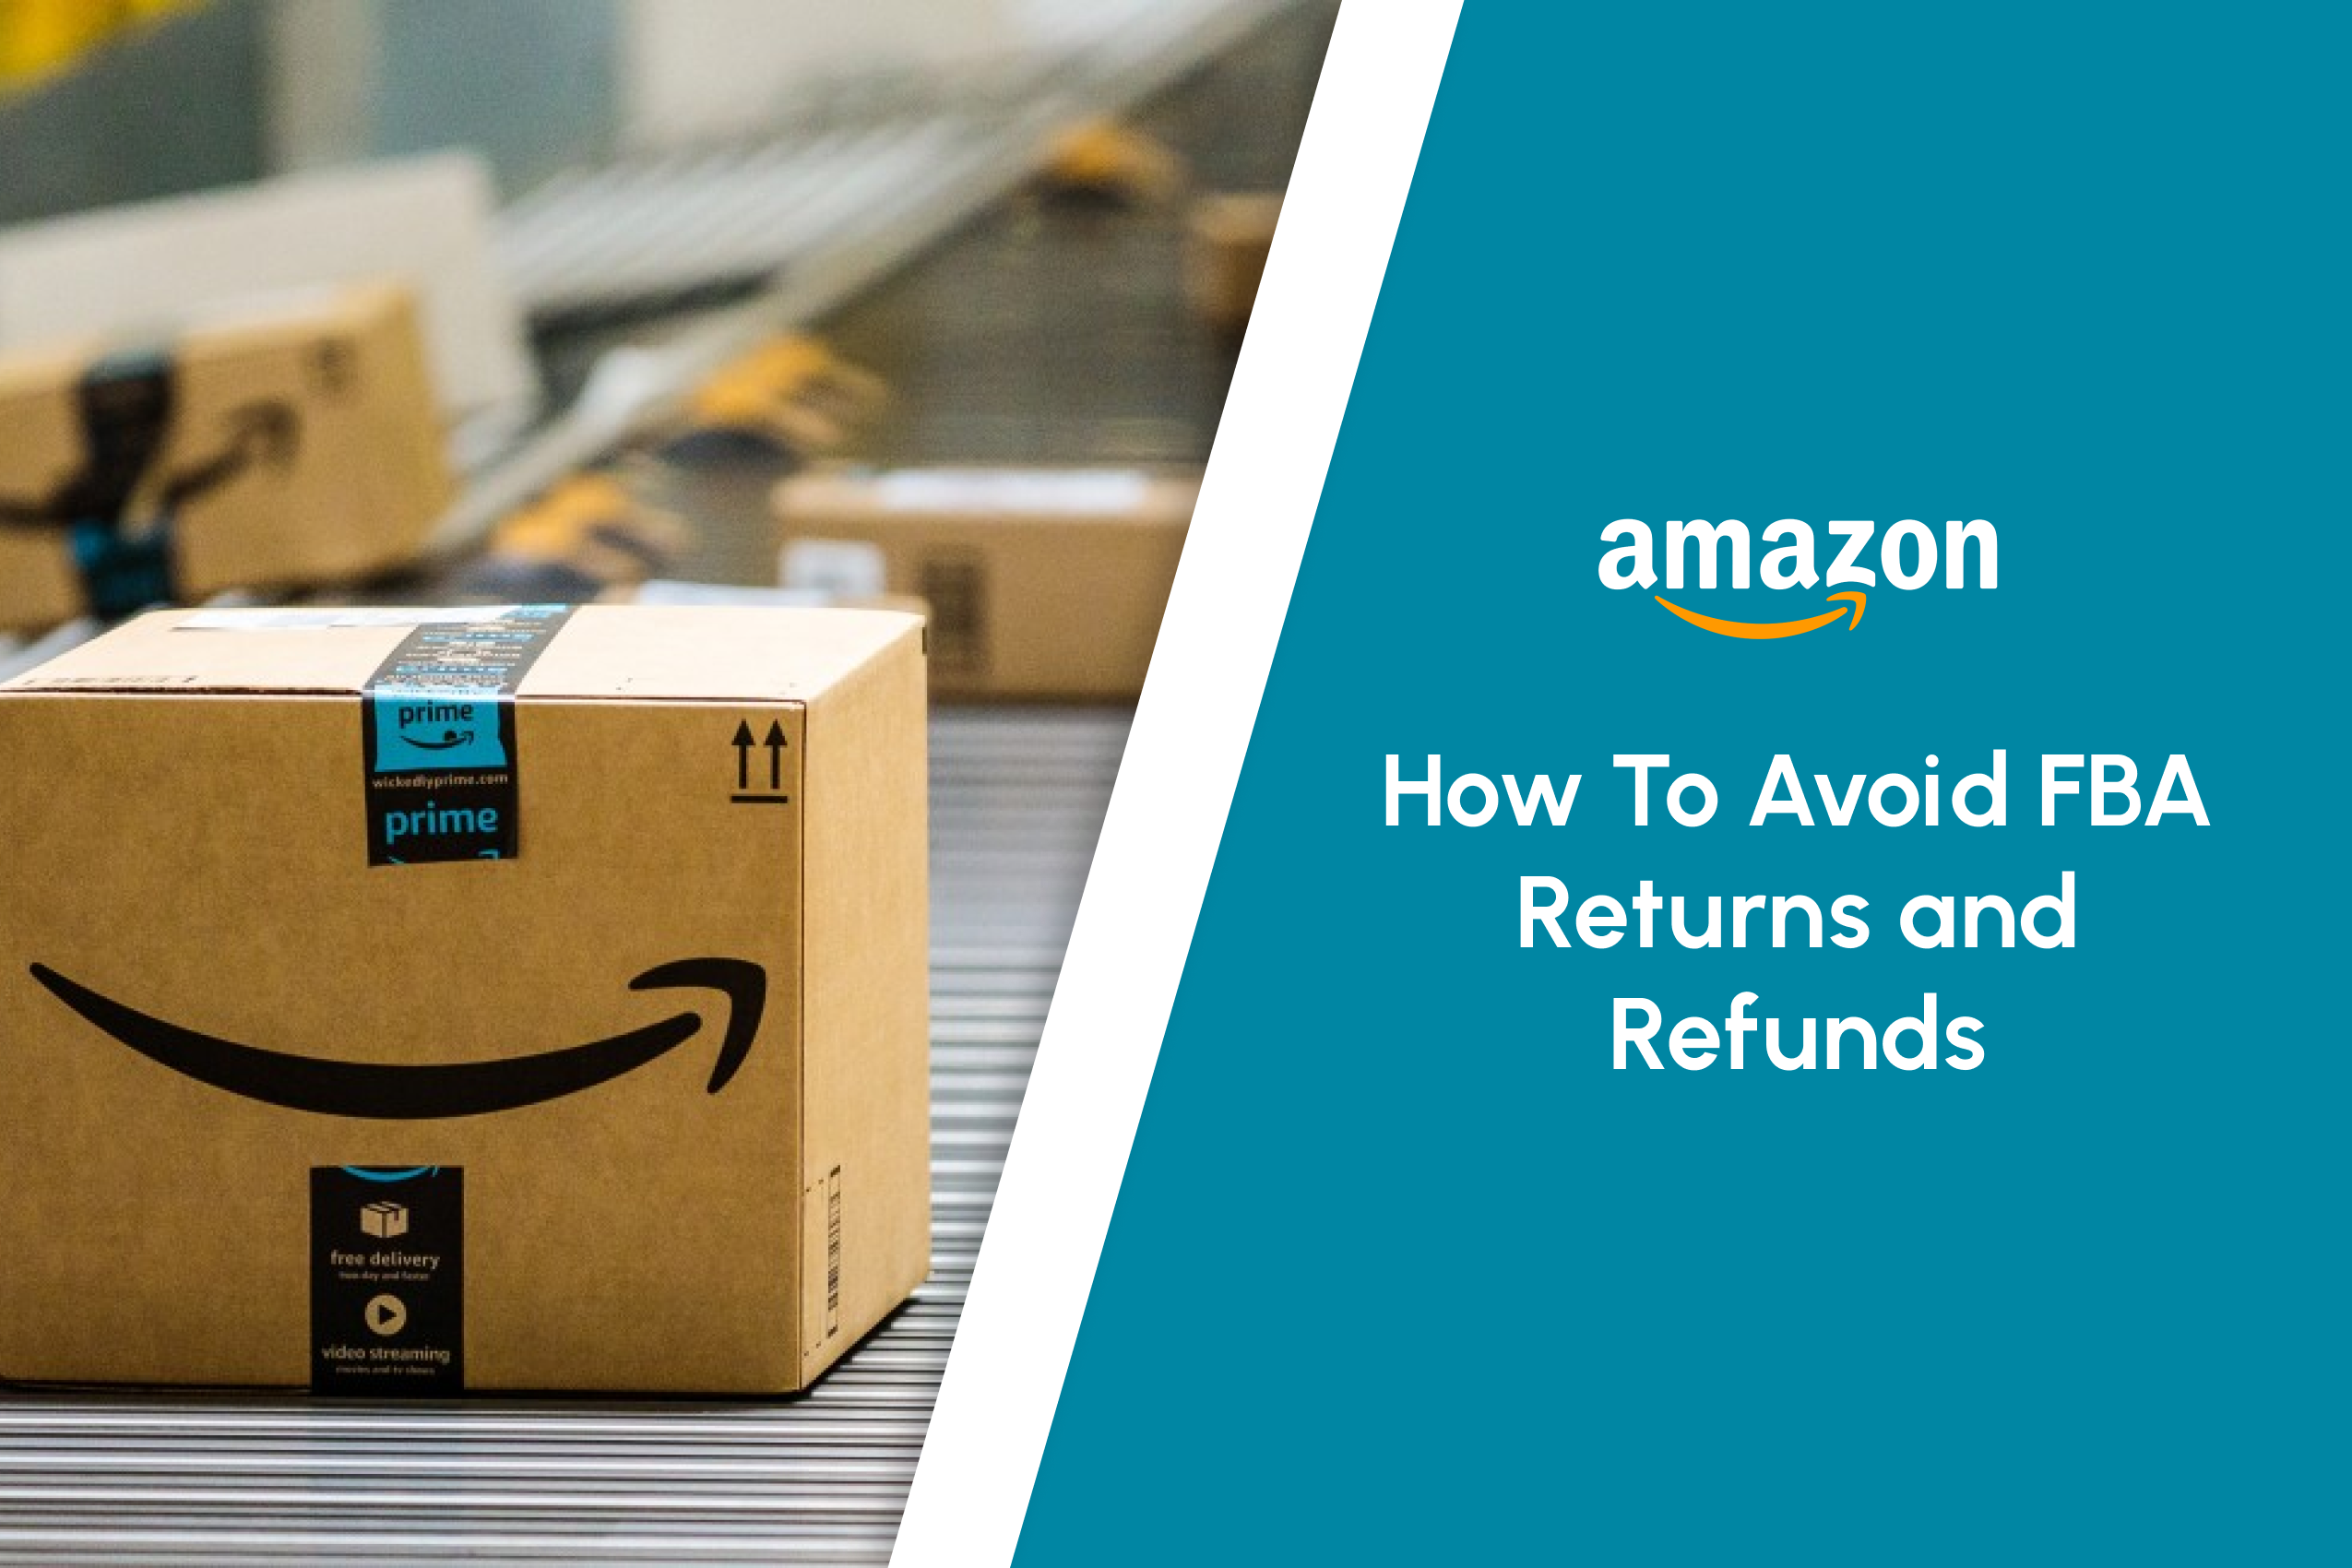 How To Avoid Amazon FBA Returns and Refunds